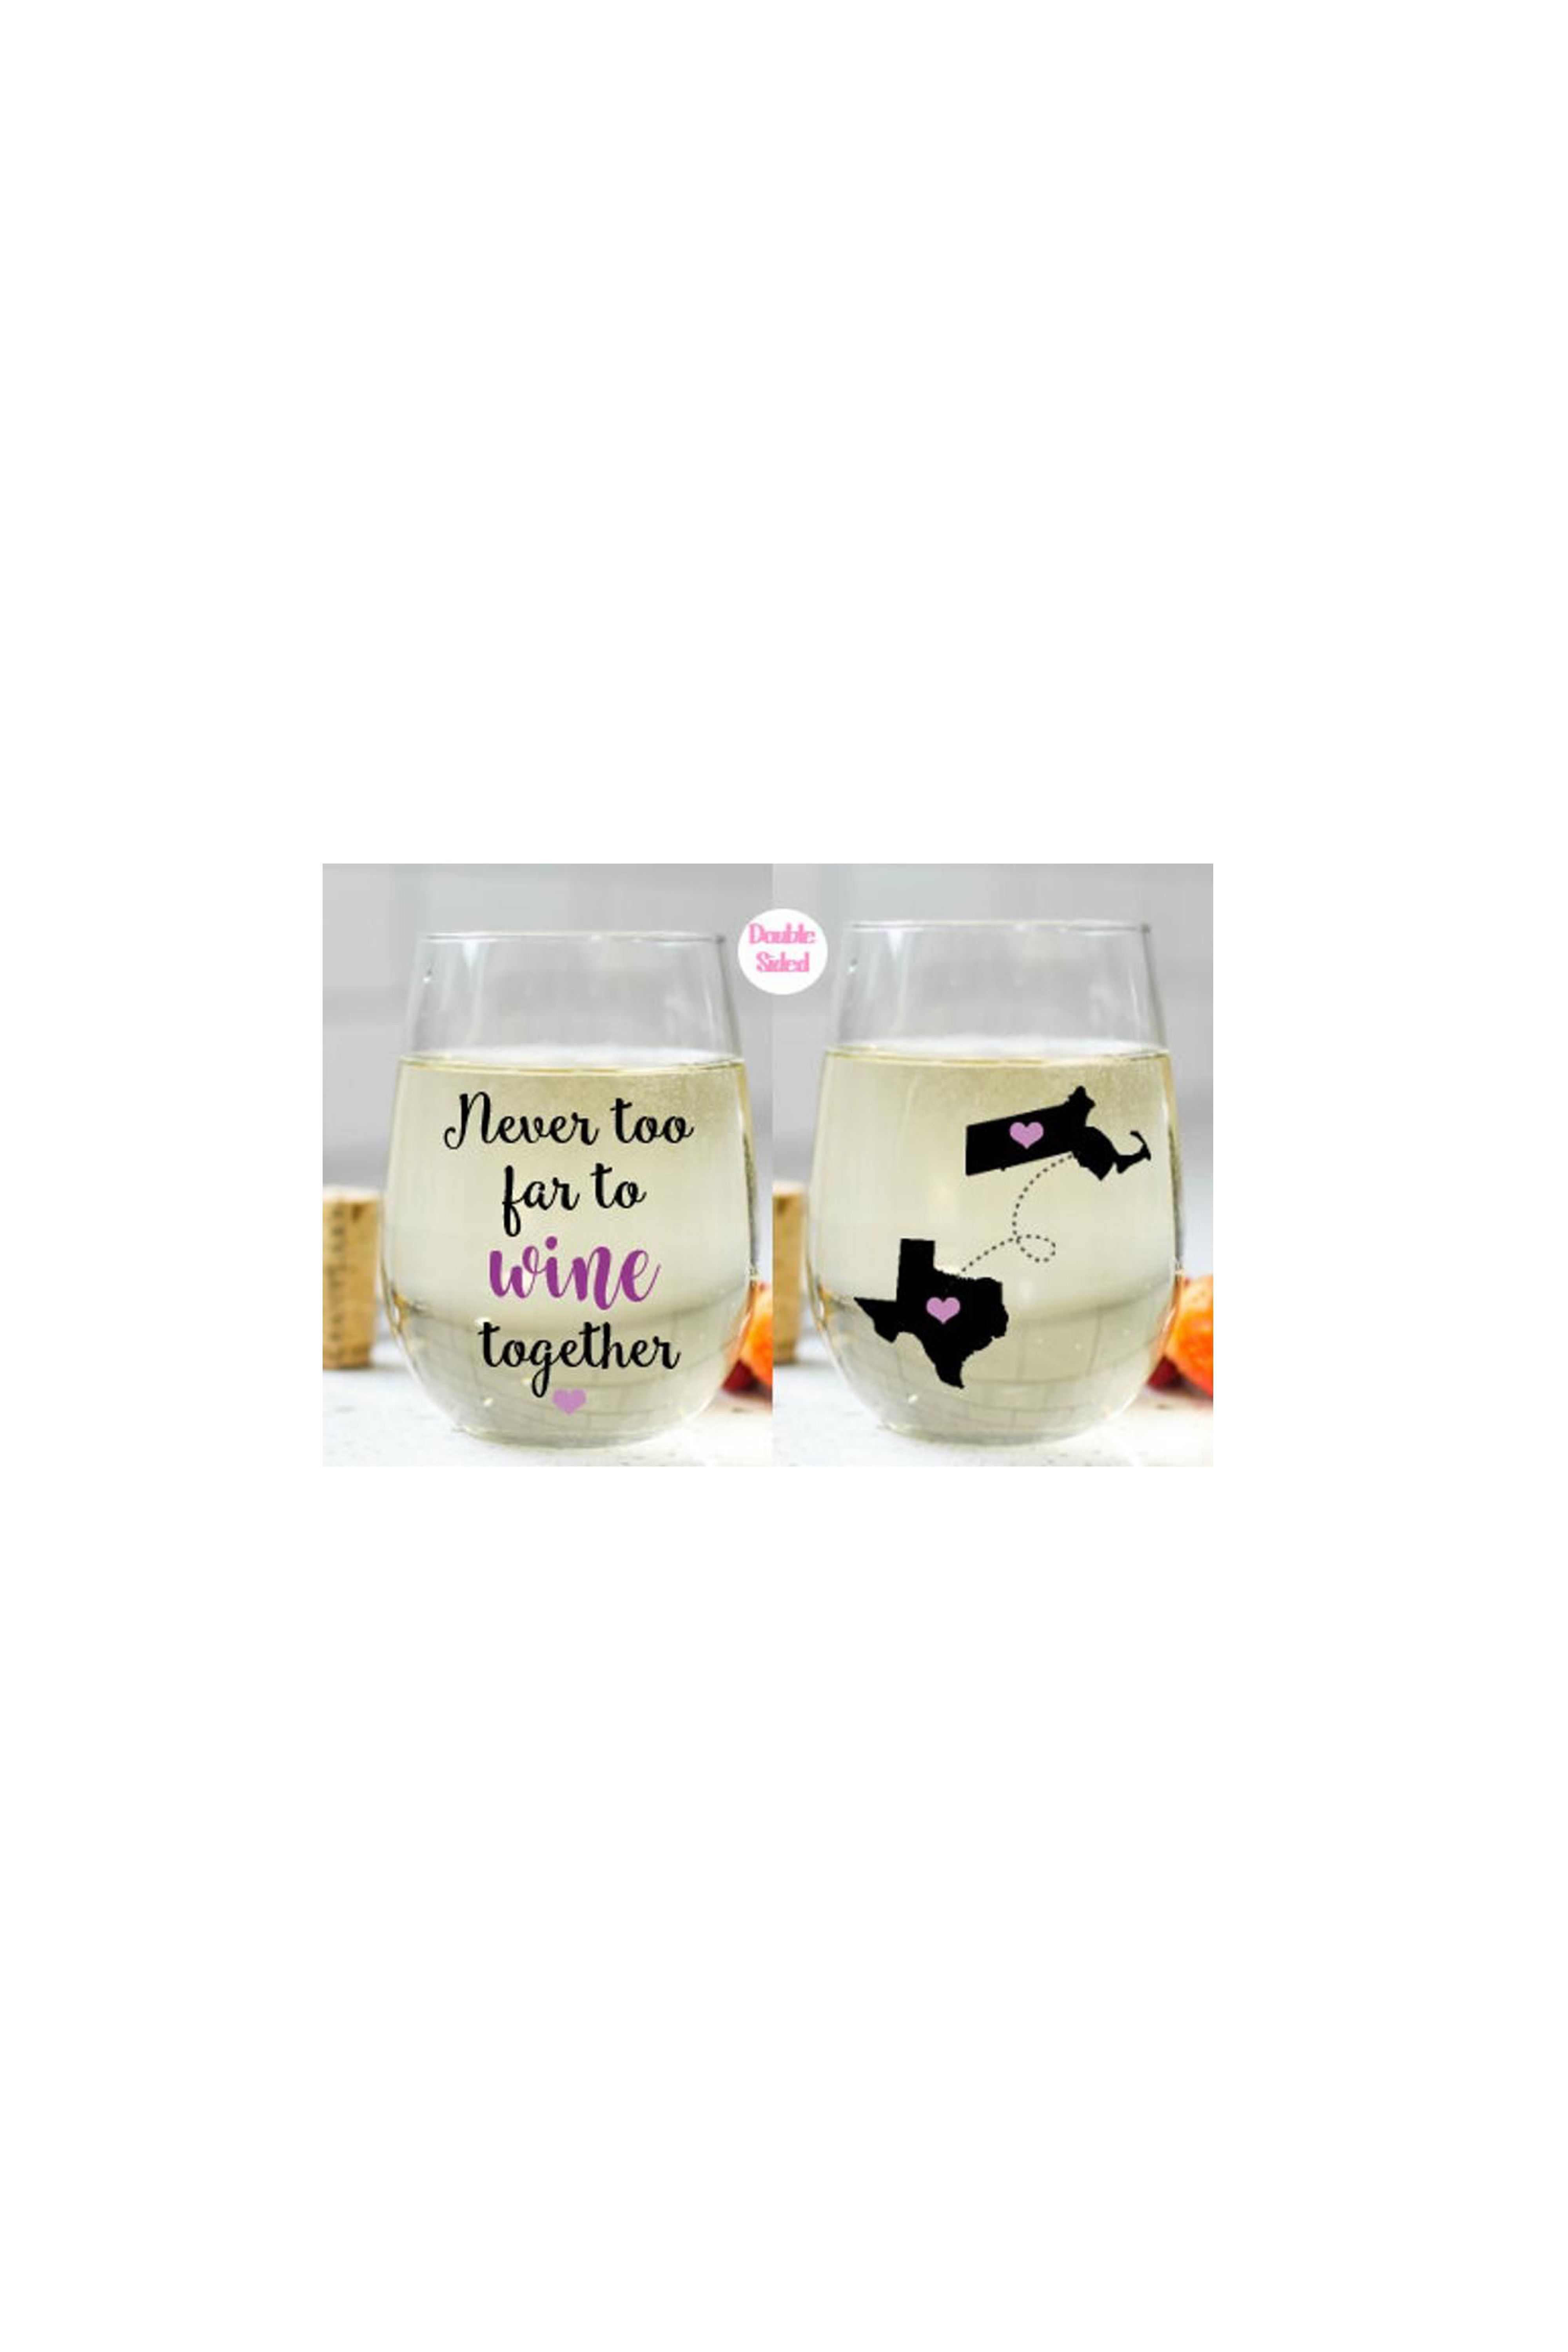 Best Friends wine glass 21 Oz Never too Far to Wine Together Wine Glass Miss you wine glass Long Distance Relationship